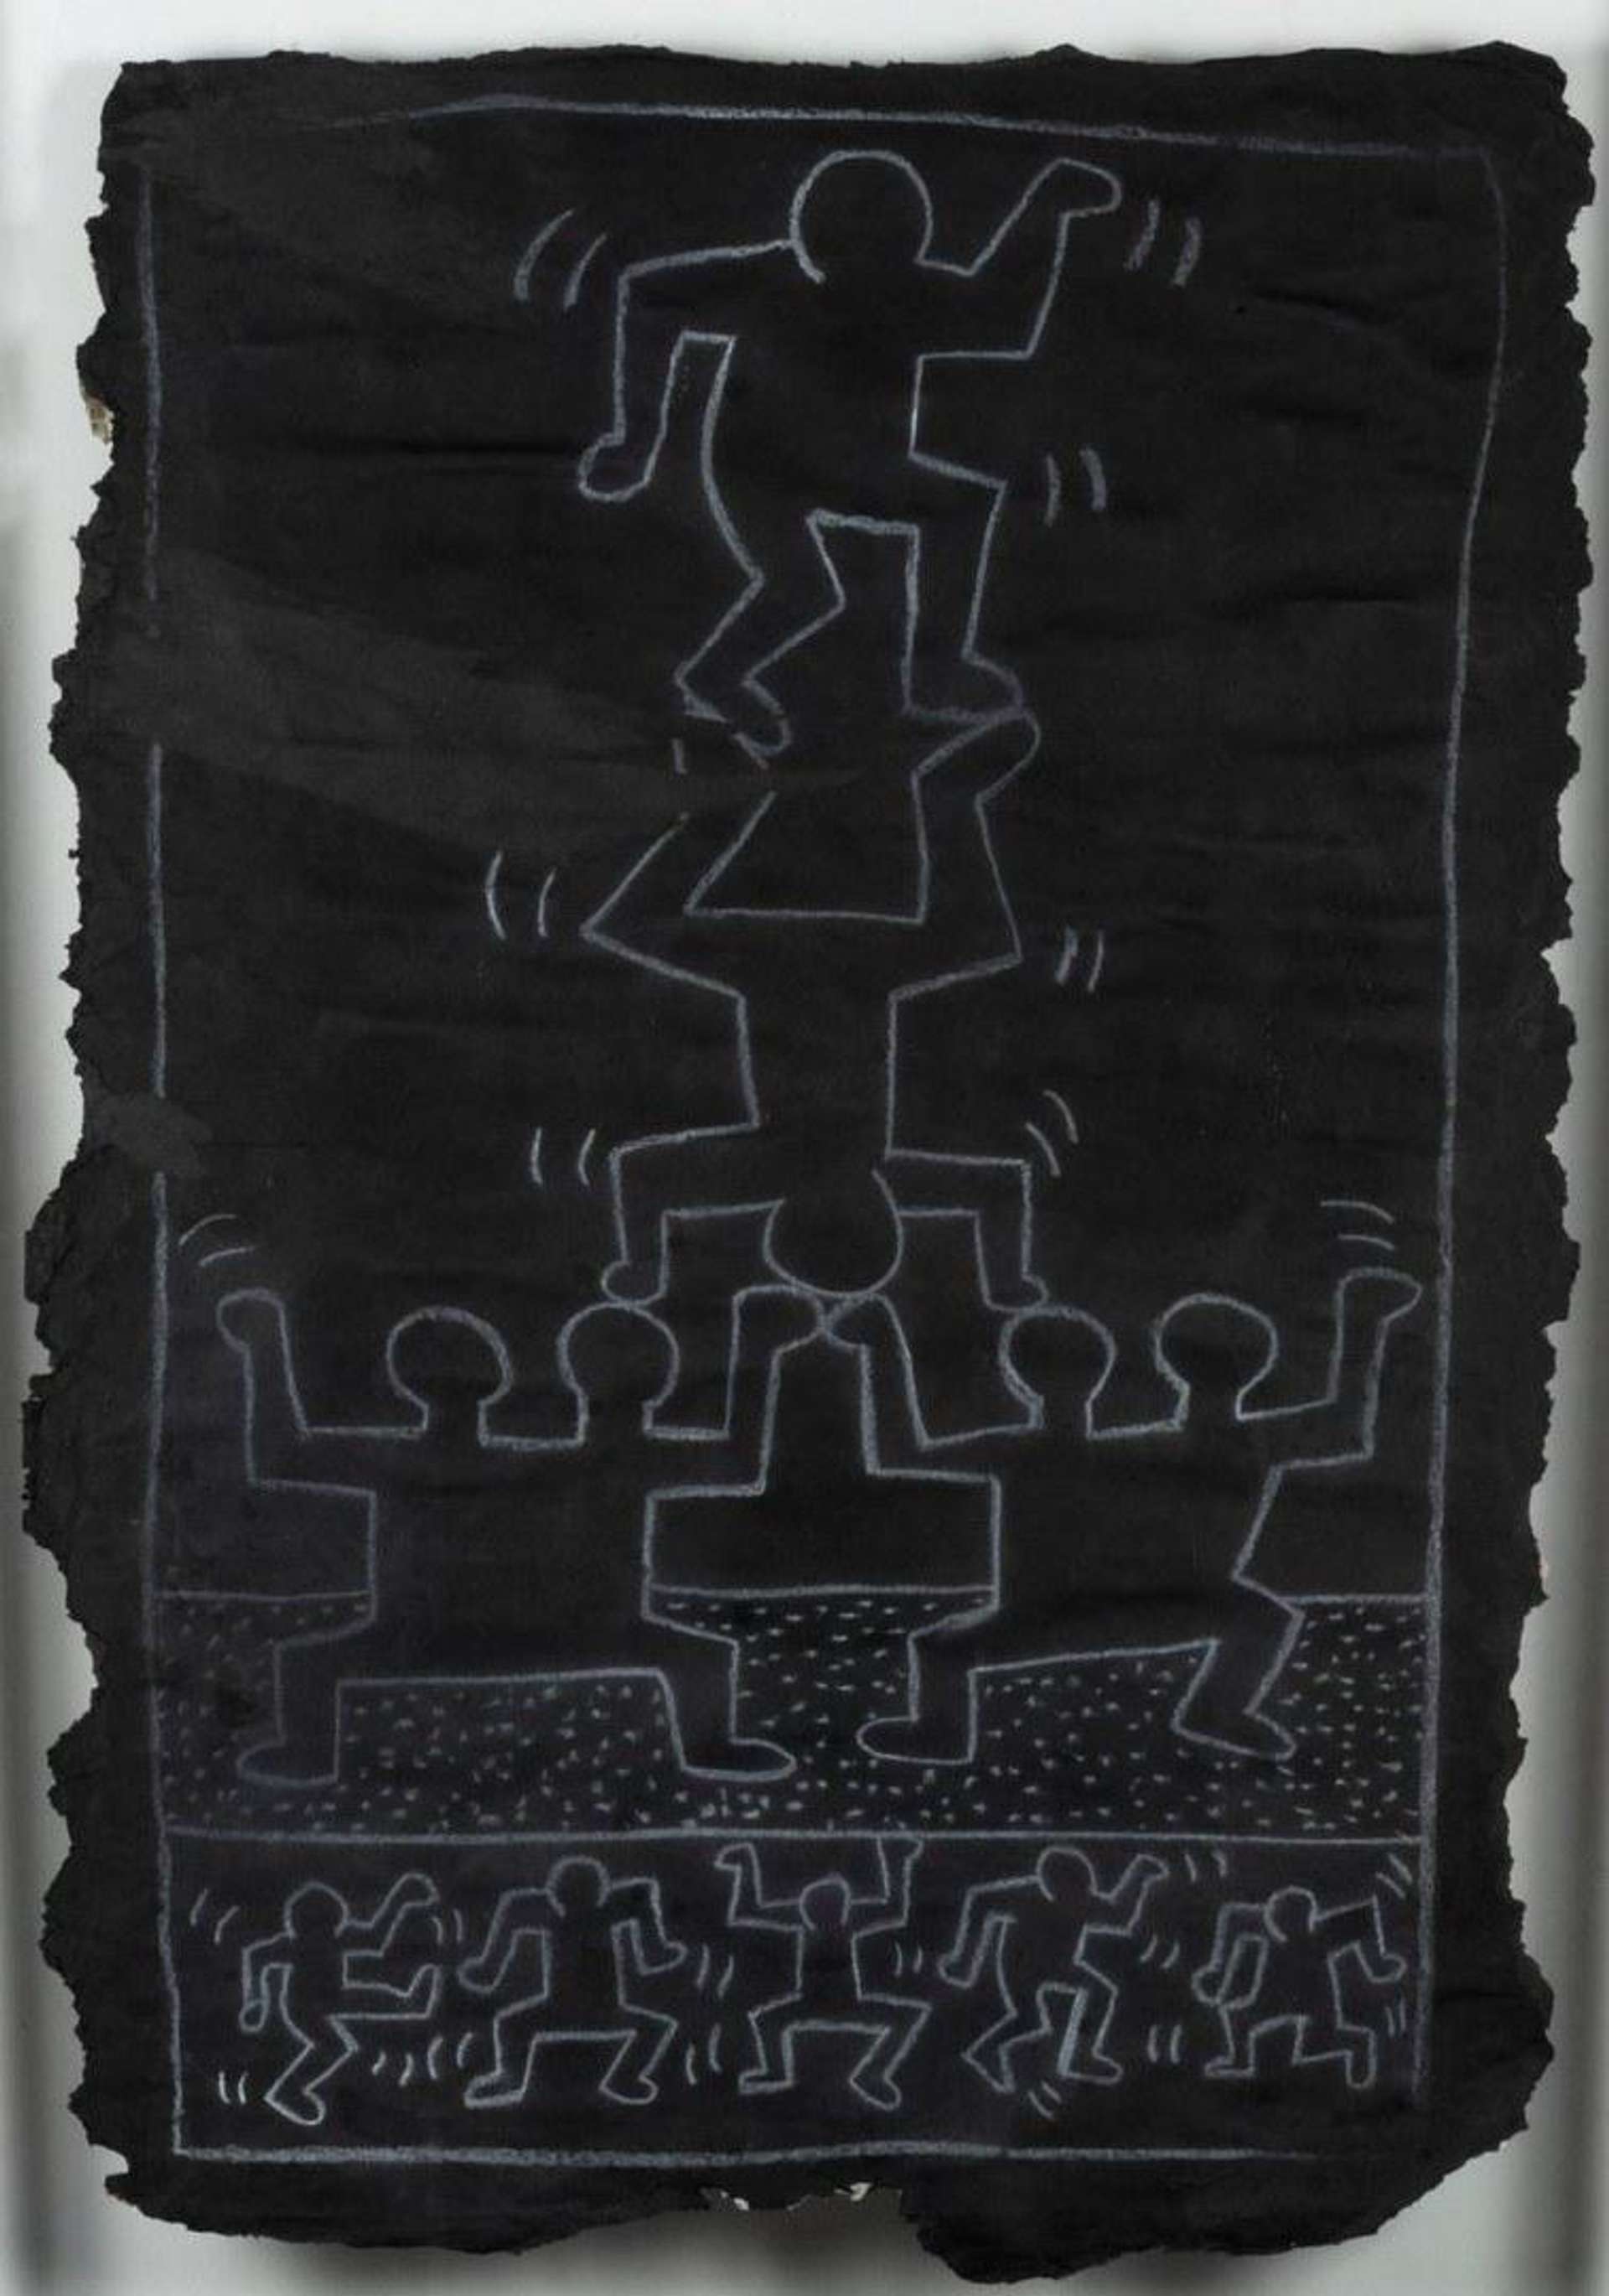 An image of a Subway Drawing by Keith Haring. It shows a group of figures creating a human pyramid, lifting each other up.